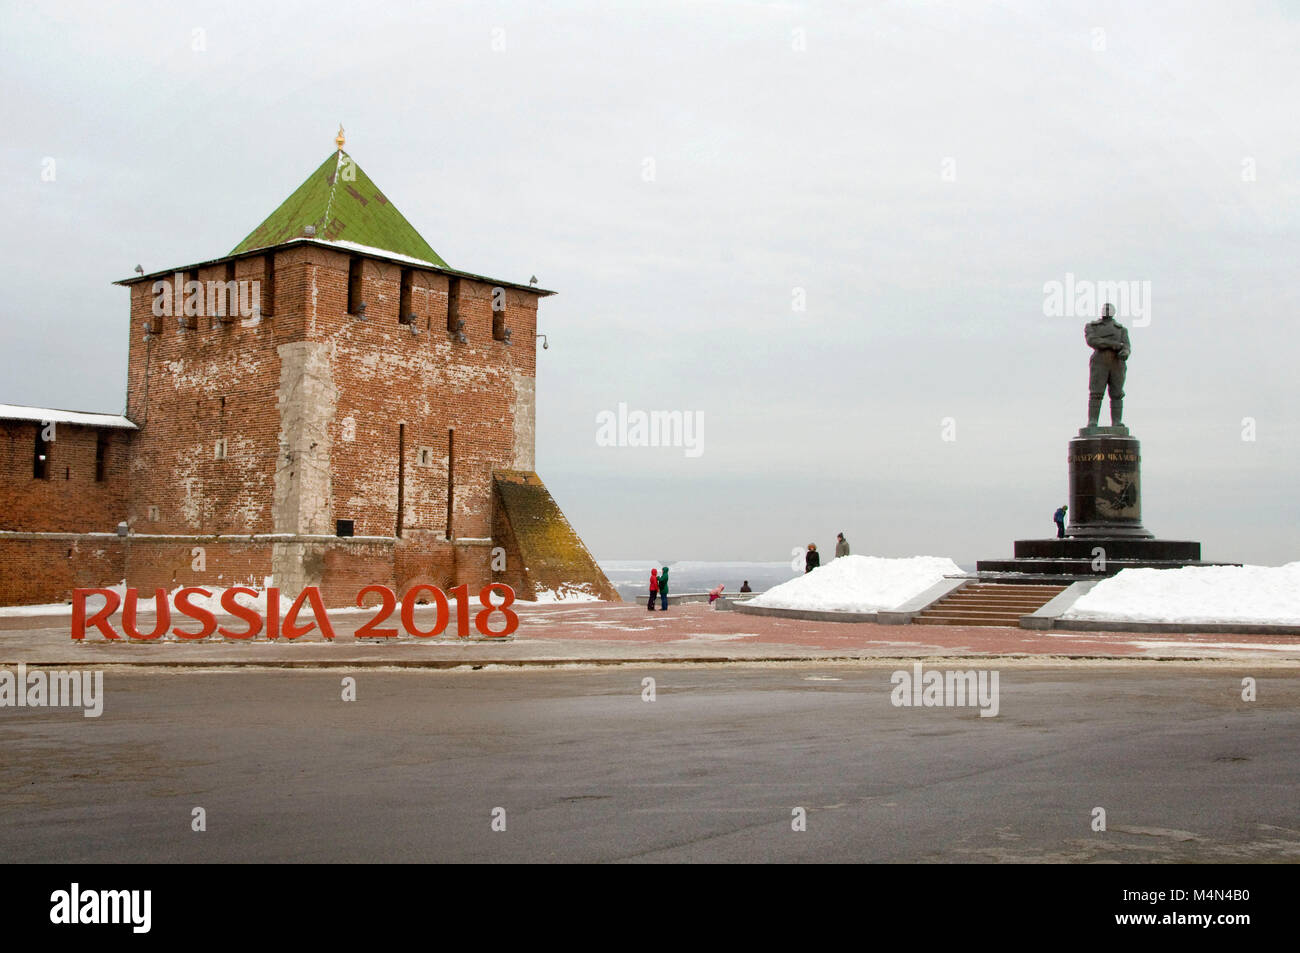 A sign for the 2018 World Cup, next to the Kremlin in Nizhny Novgorod, Russia. Stock Photo